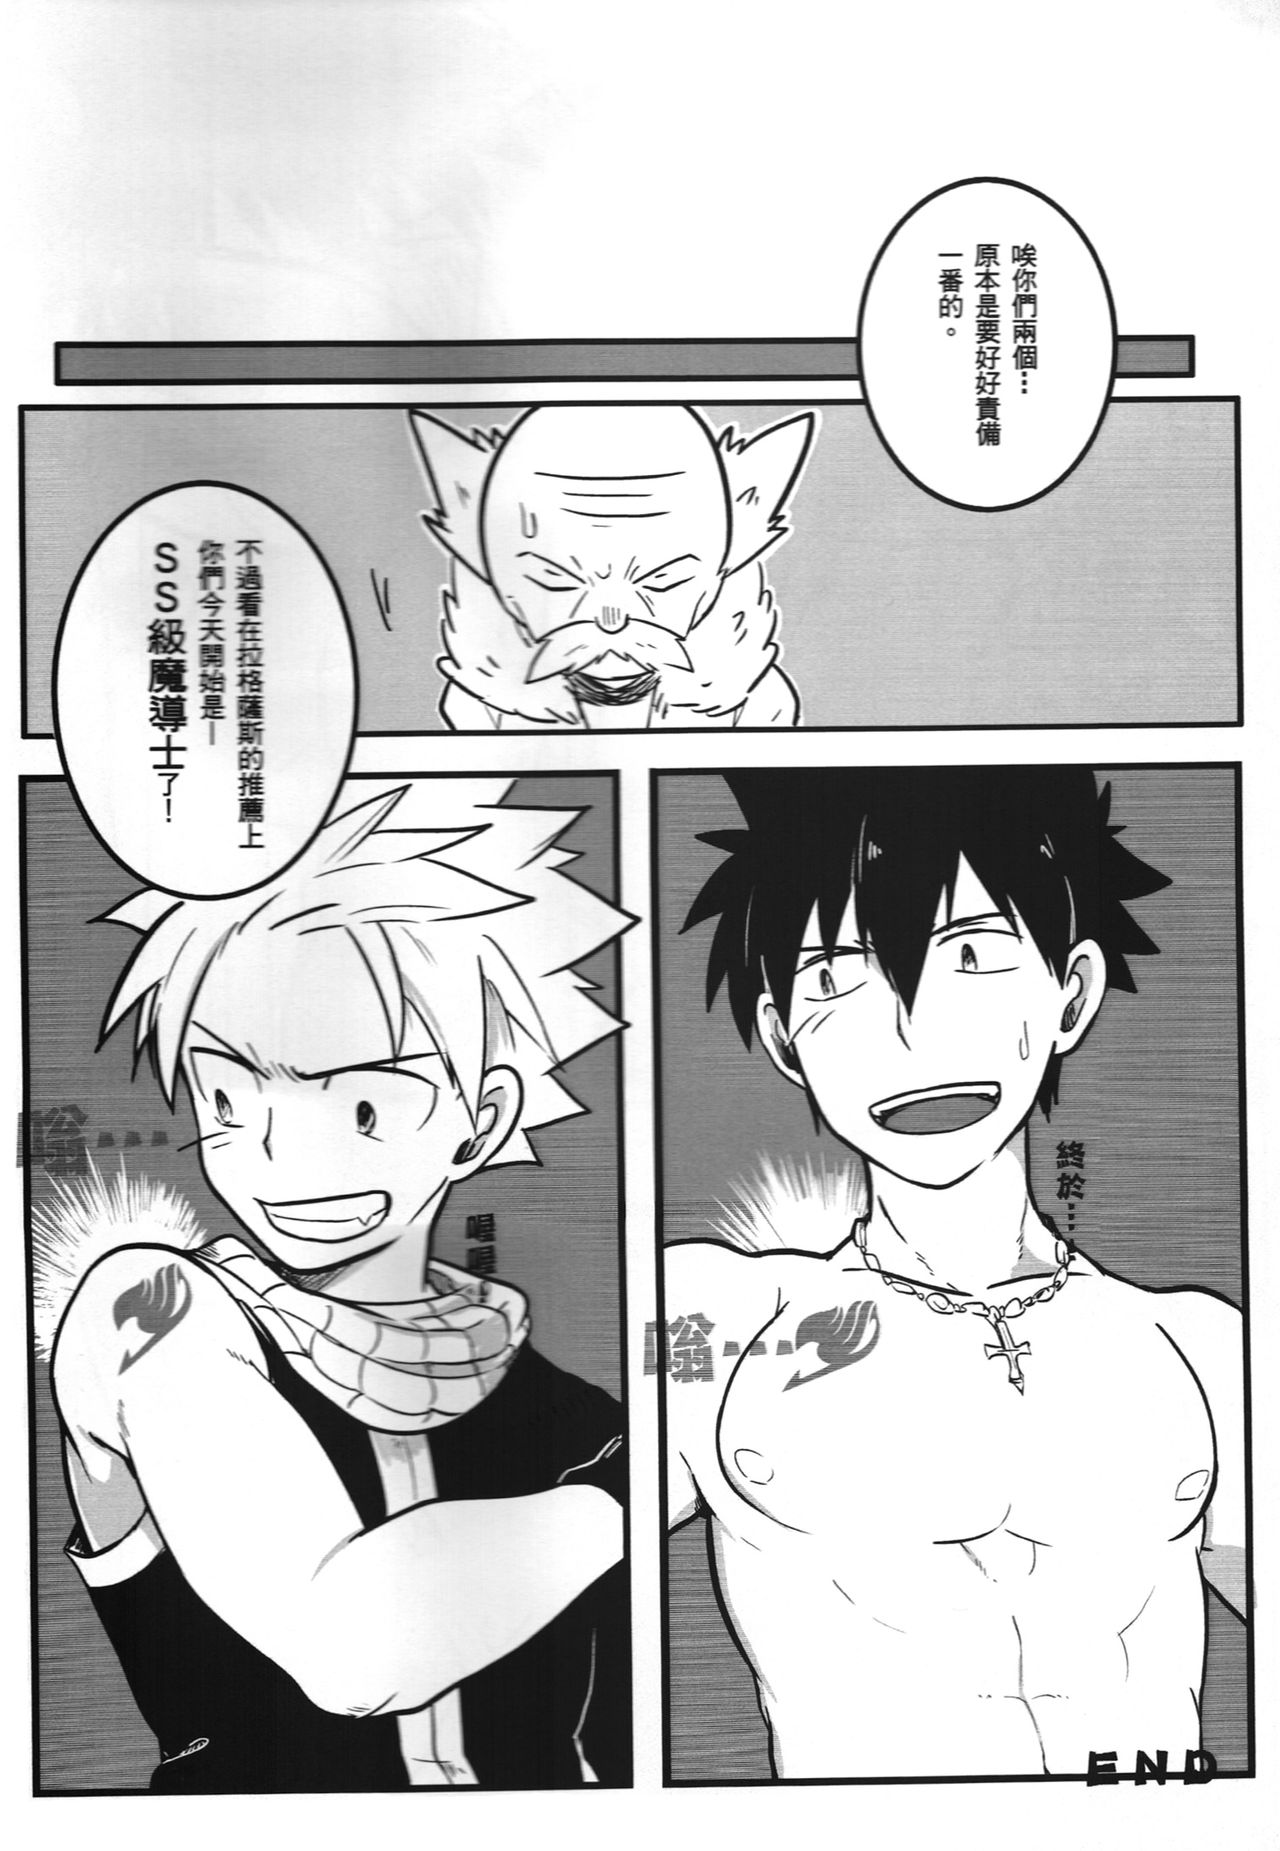 (CWT37) [APer (SEXY)] SS Kyuu Ninmu! (Fairy Tail) [Chinese] (CWT37) [APer (SEXY)] SS級任務! (フェアリーテイル) [中国語]